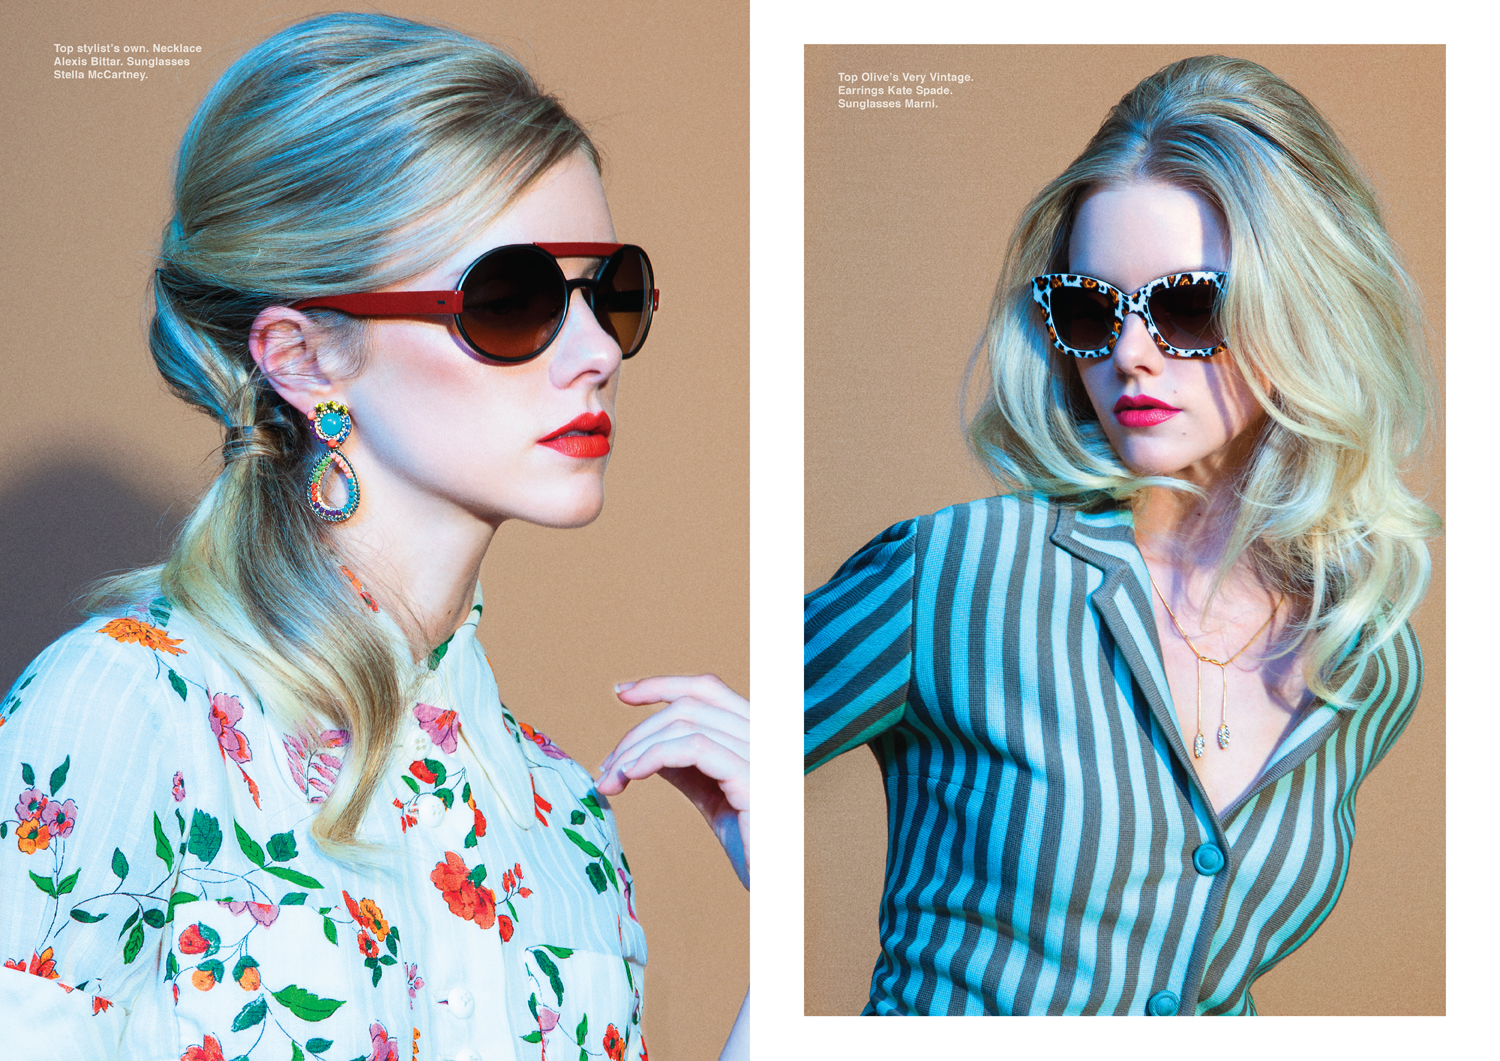 Left page, top stylist's own. Necklace Alexis Bittar. Sunglasses Stella McCartney. Right page, top Olive's Very Vintage. Earrings Kate Spade. Sunglasses Marni. 